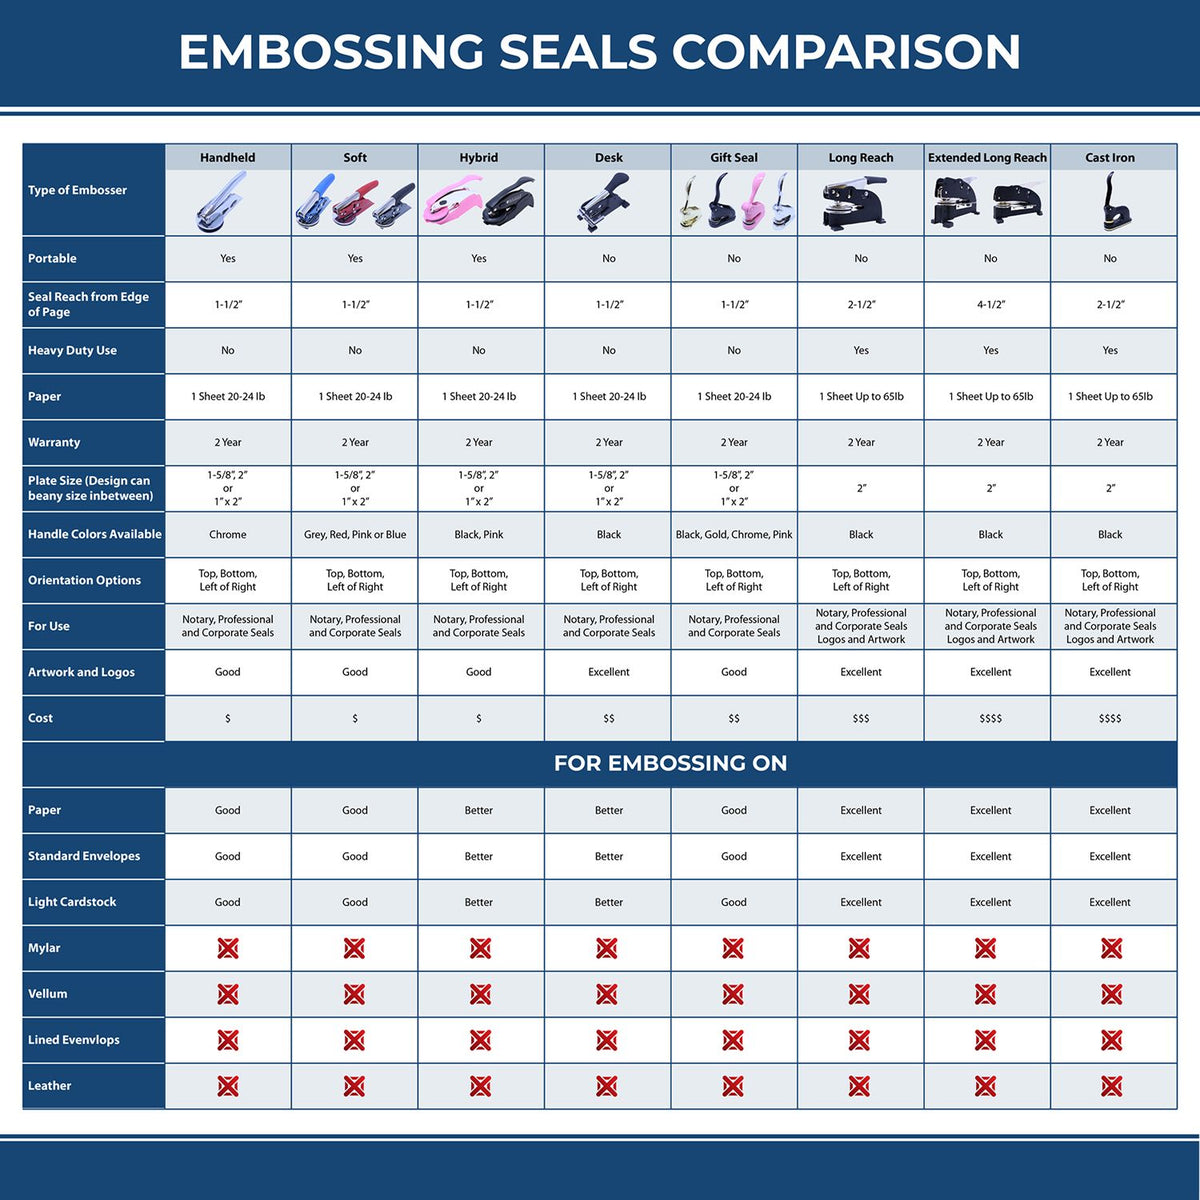 A comparison chart for the different types of mount models available for the Soft Pocket Kentucky Landscape Architect Embosser.